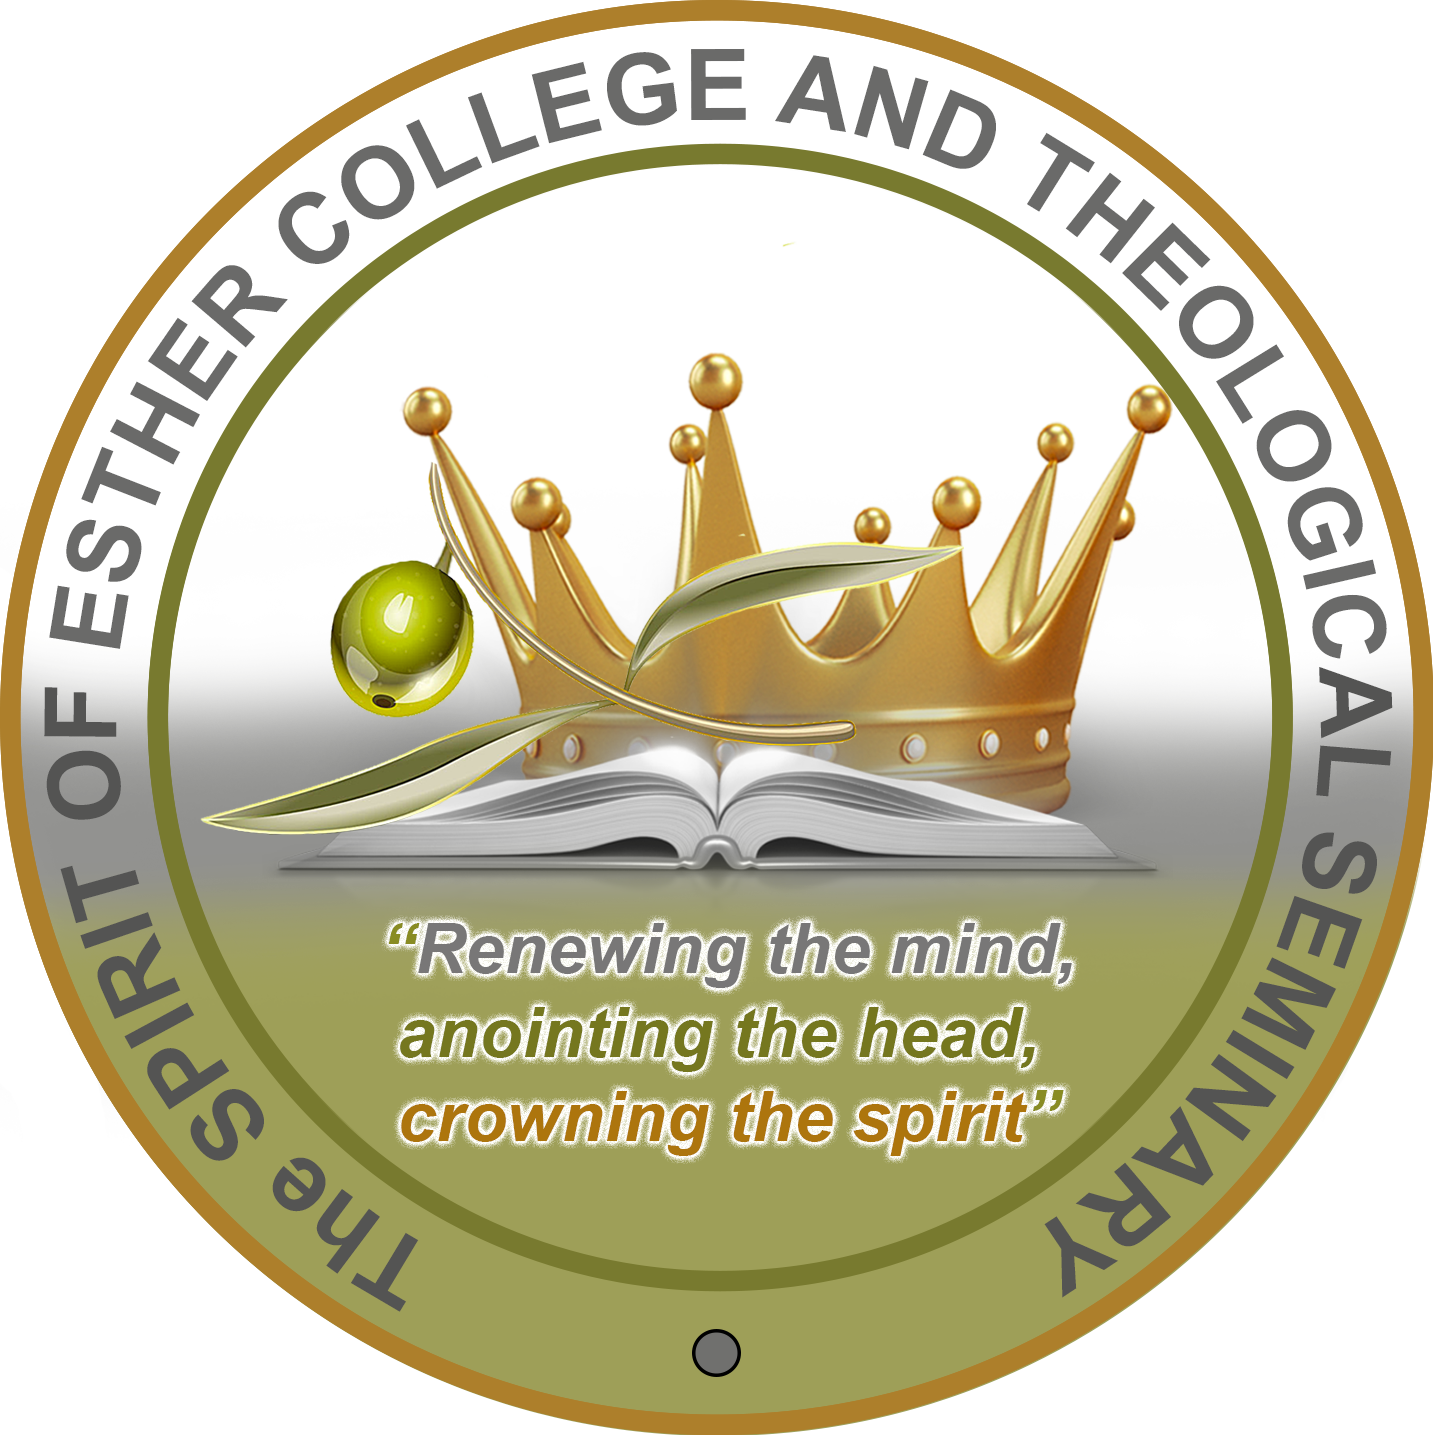 The Spirit of Esther College & Theological Seminary